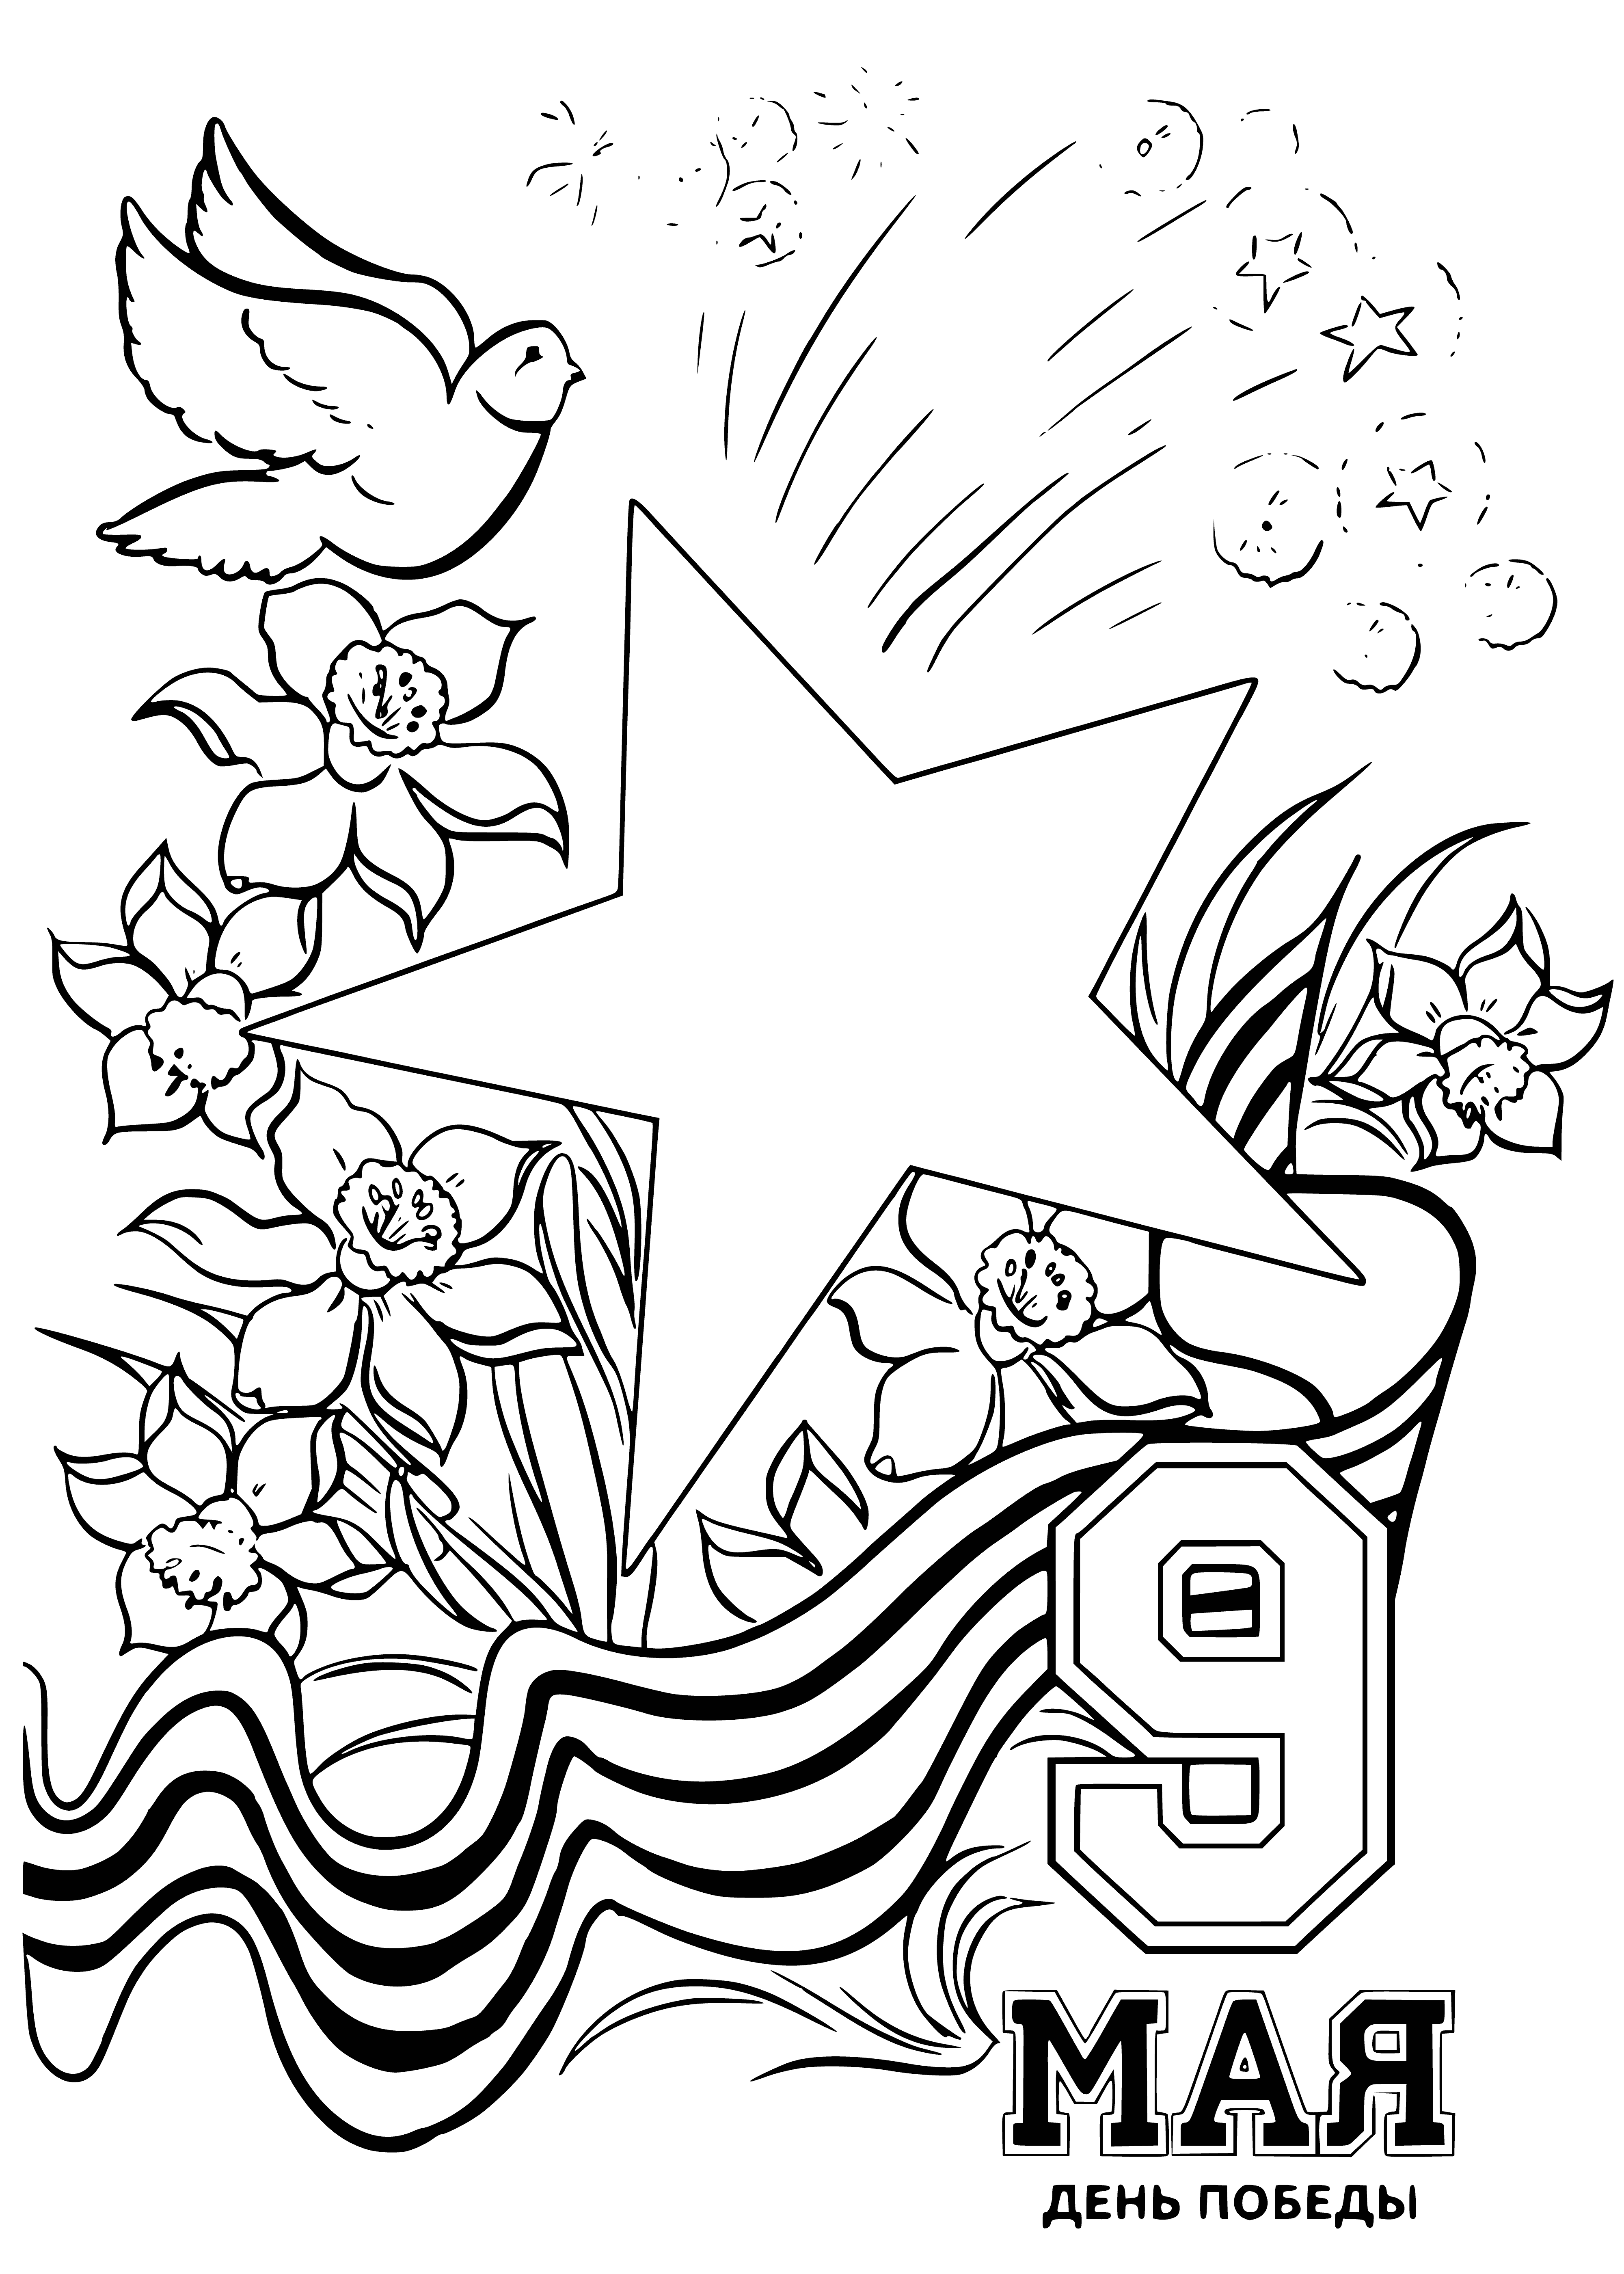 Postcard Victory Day coloring page